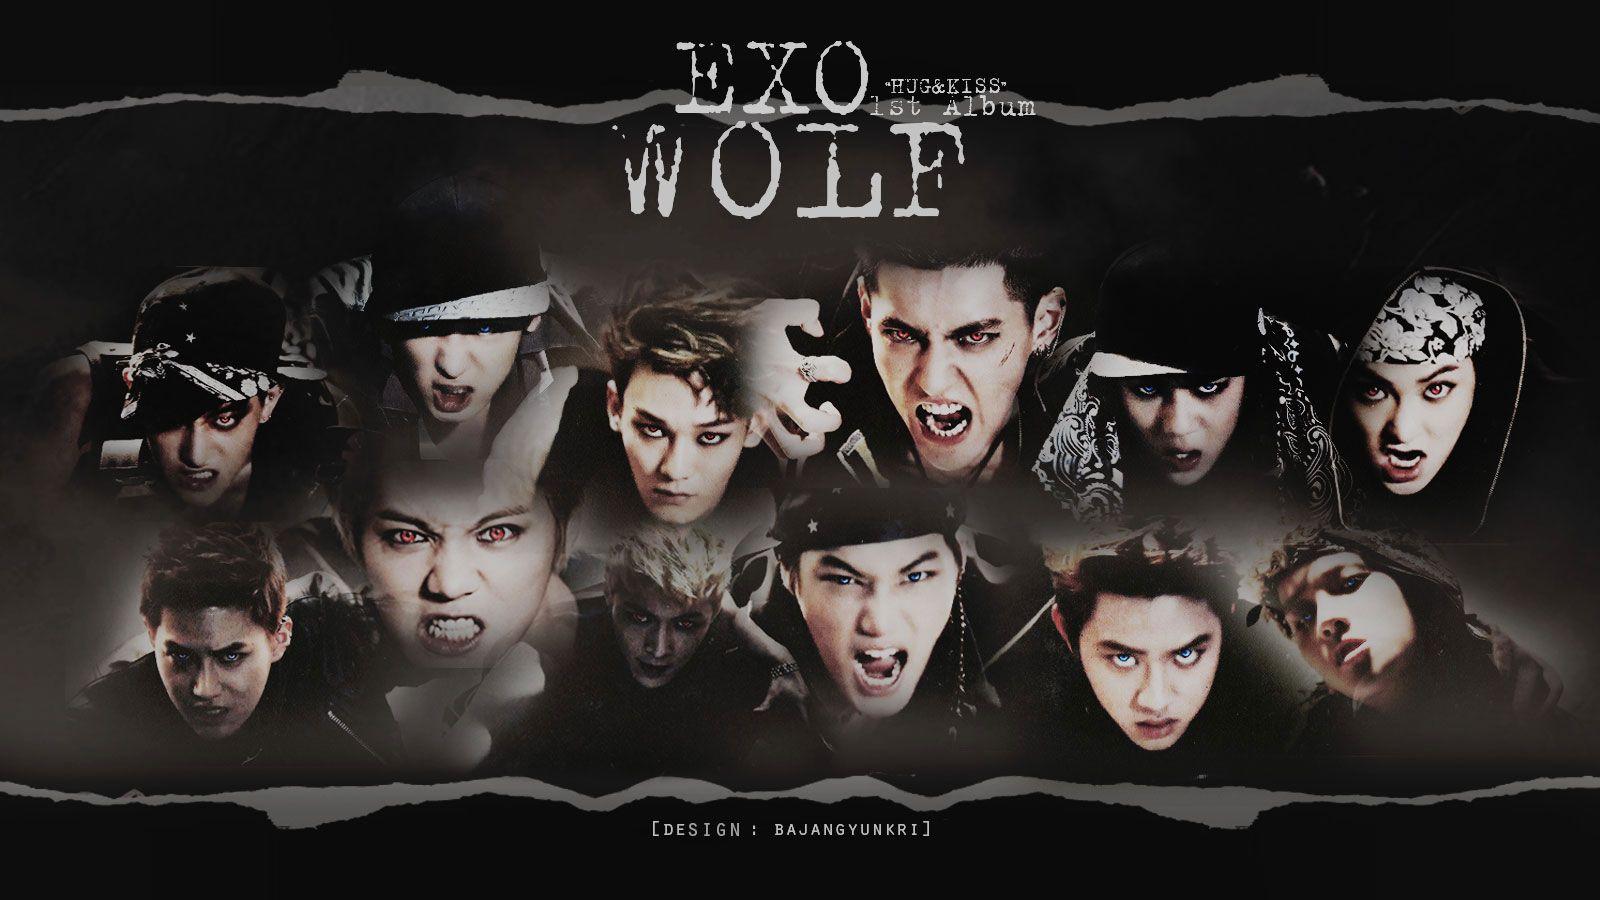 EXO Wolf. EXO HuG&KiSS Wallpaper. I want to have